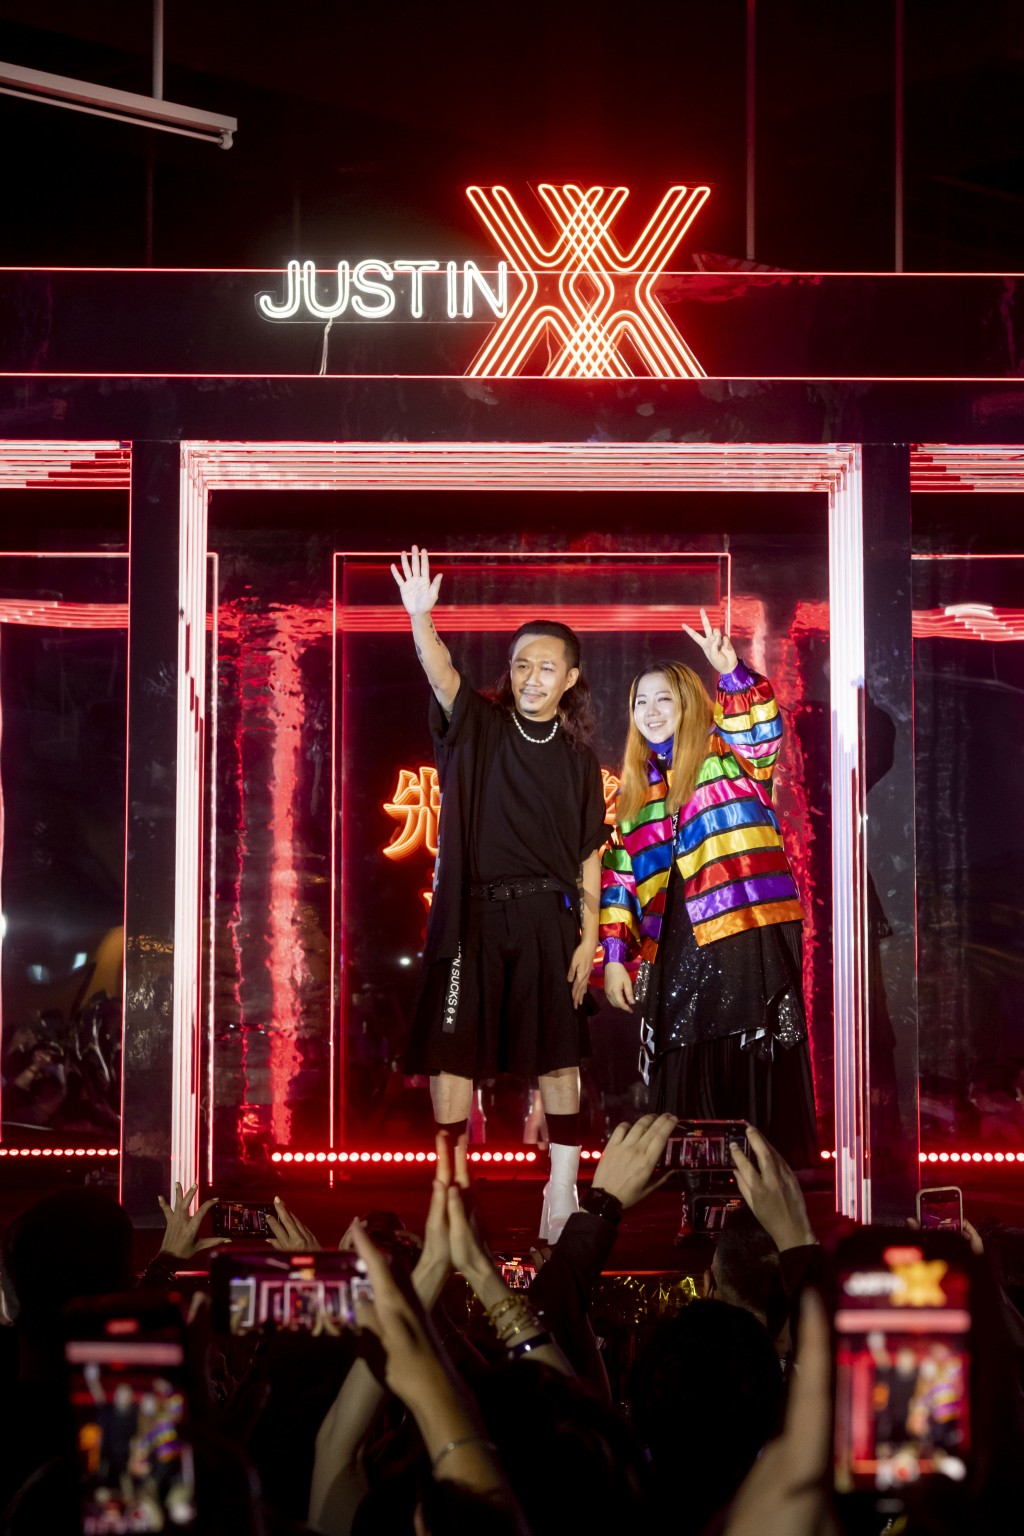 Taiwan's Justin Chou pays tribute to pop icons with fashion show